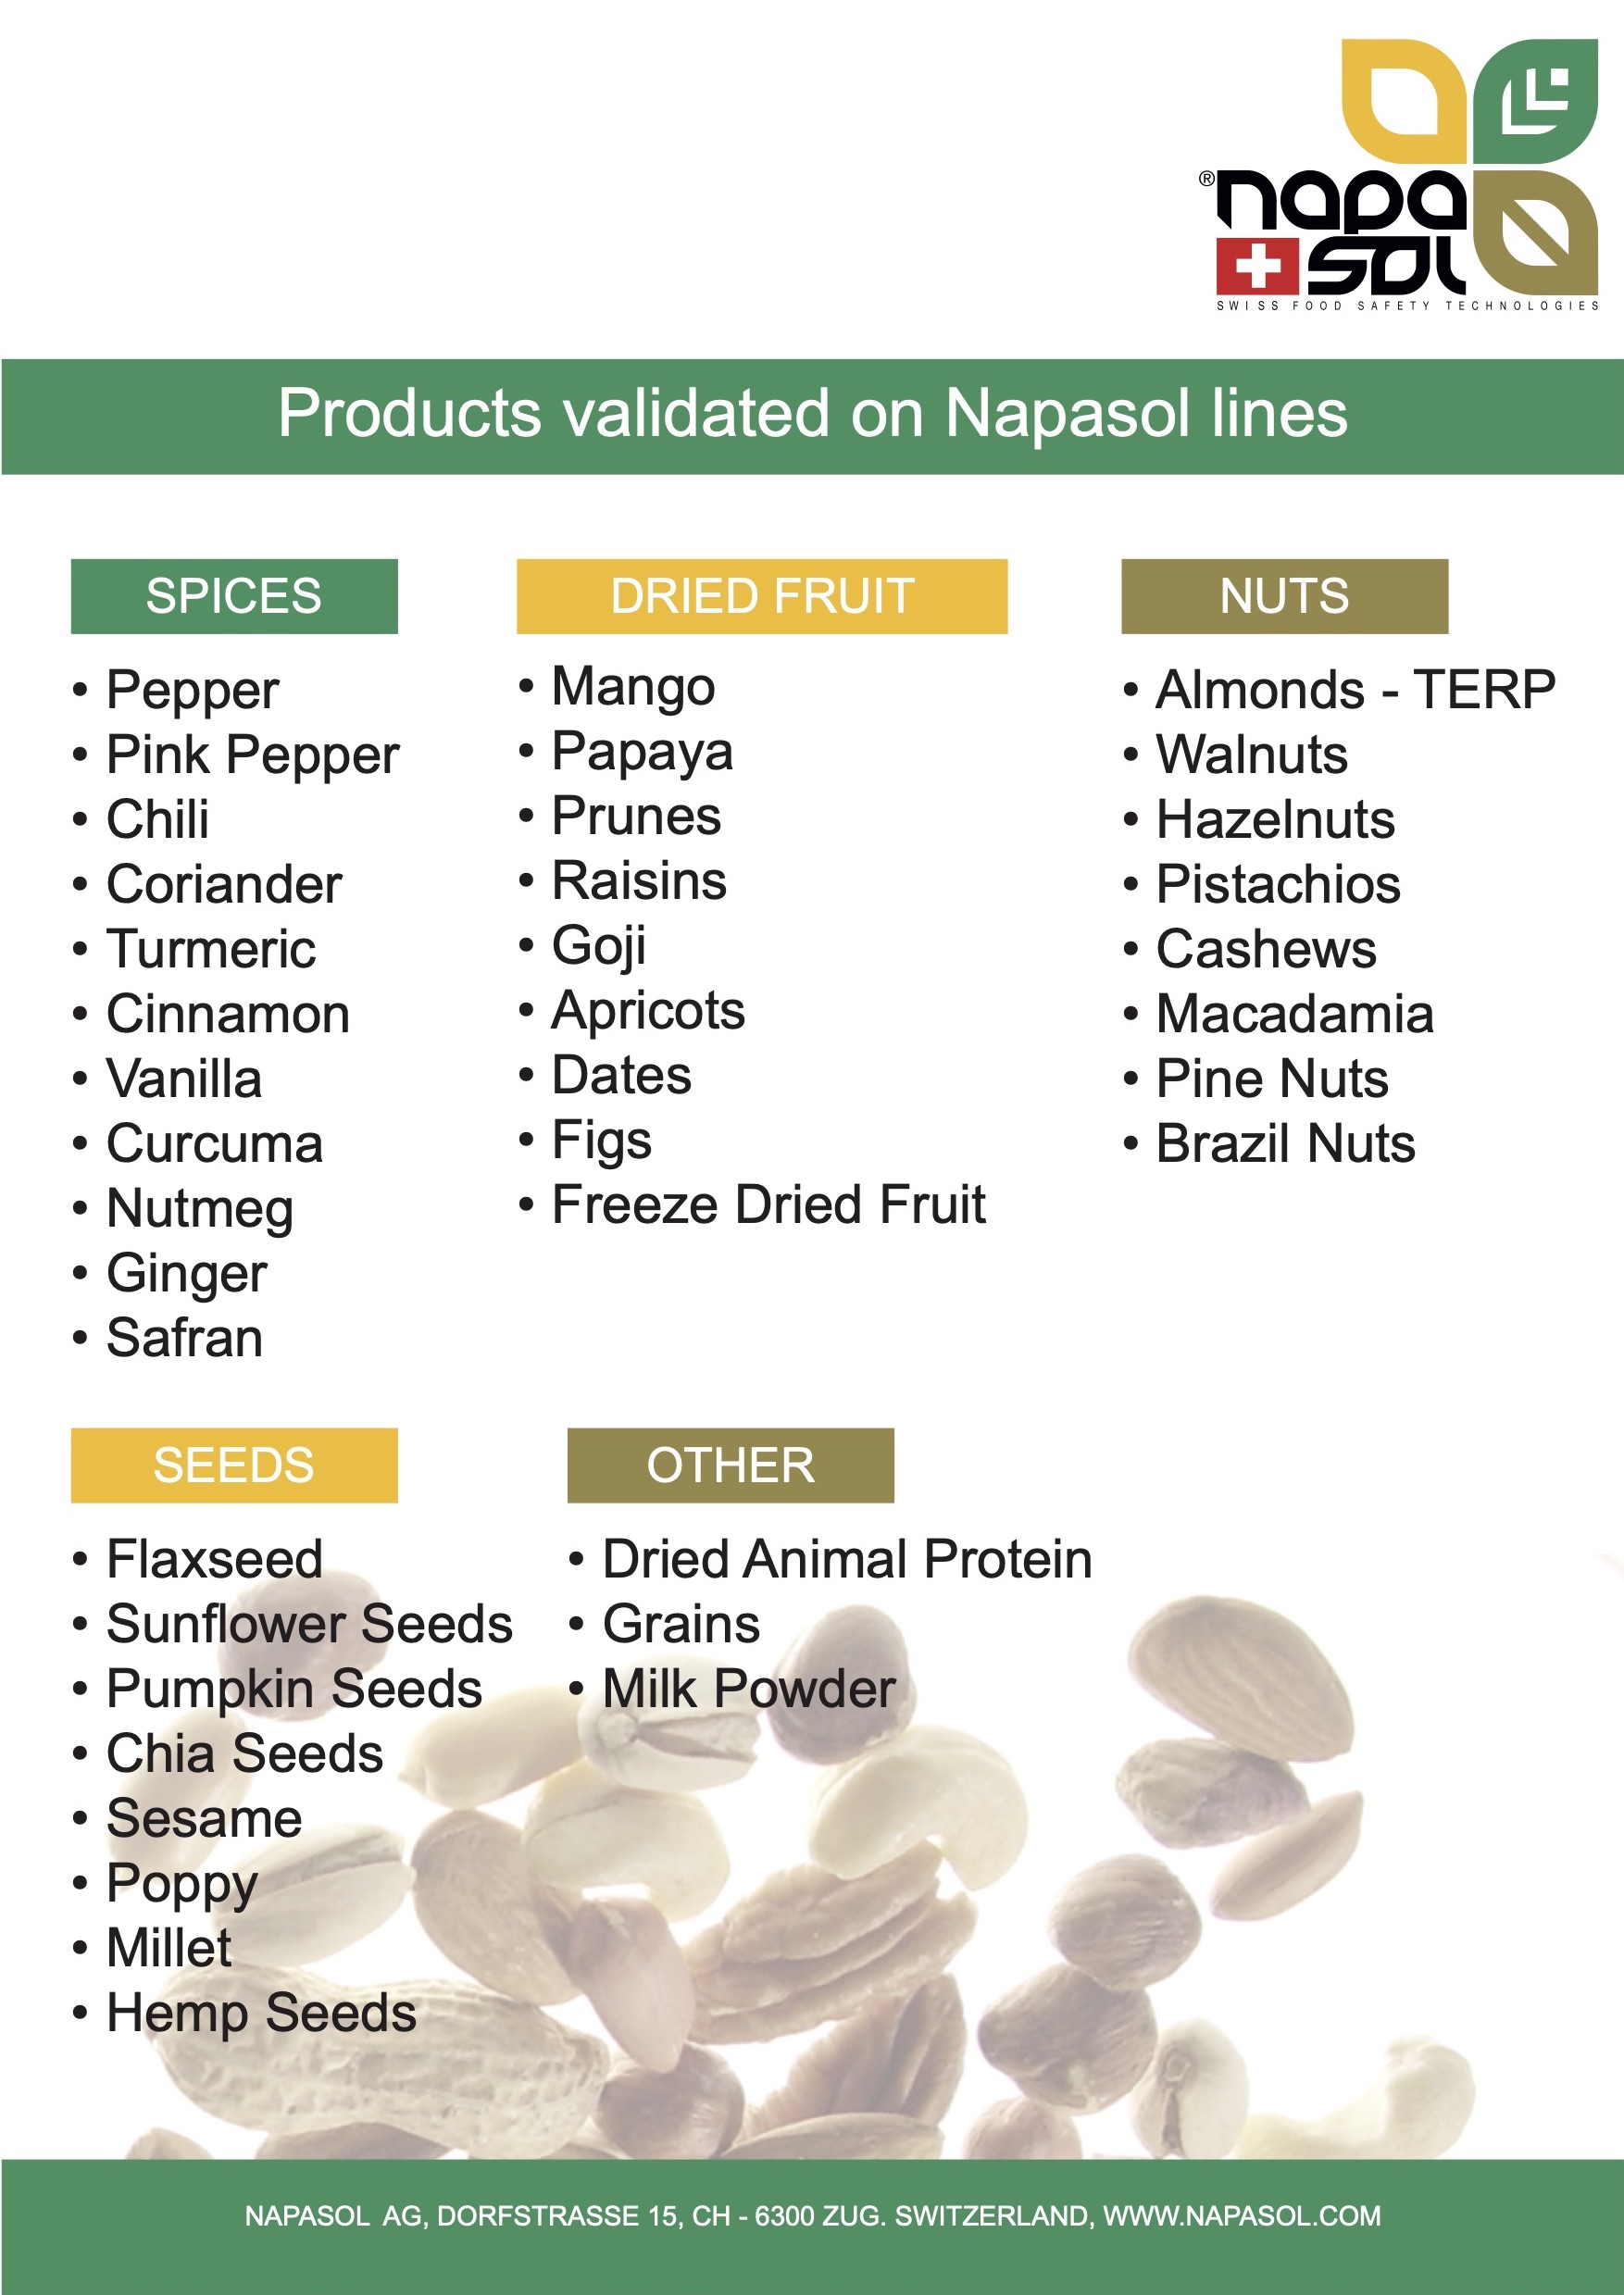 List of Products Validated on Napasol pasteurization plants